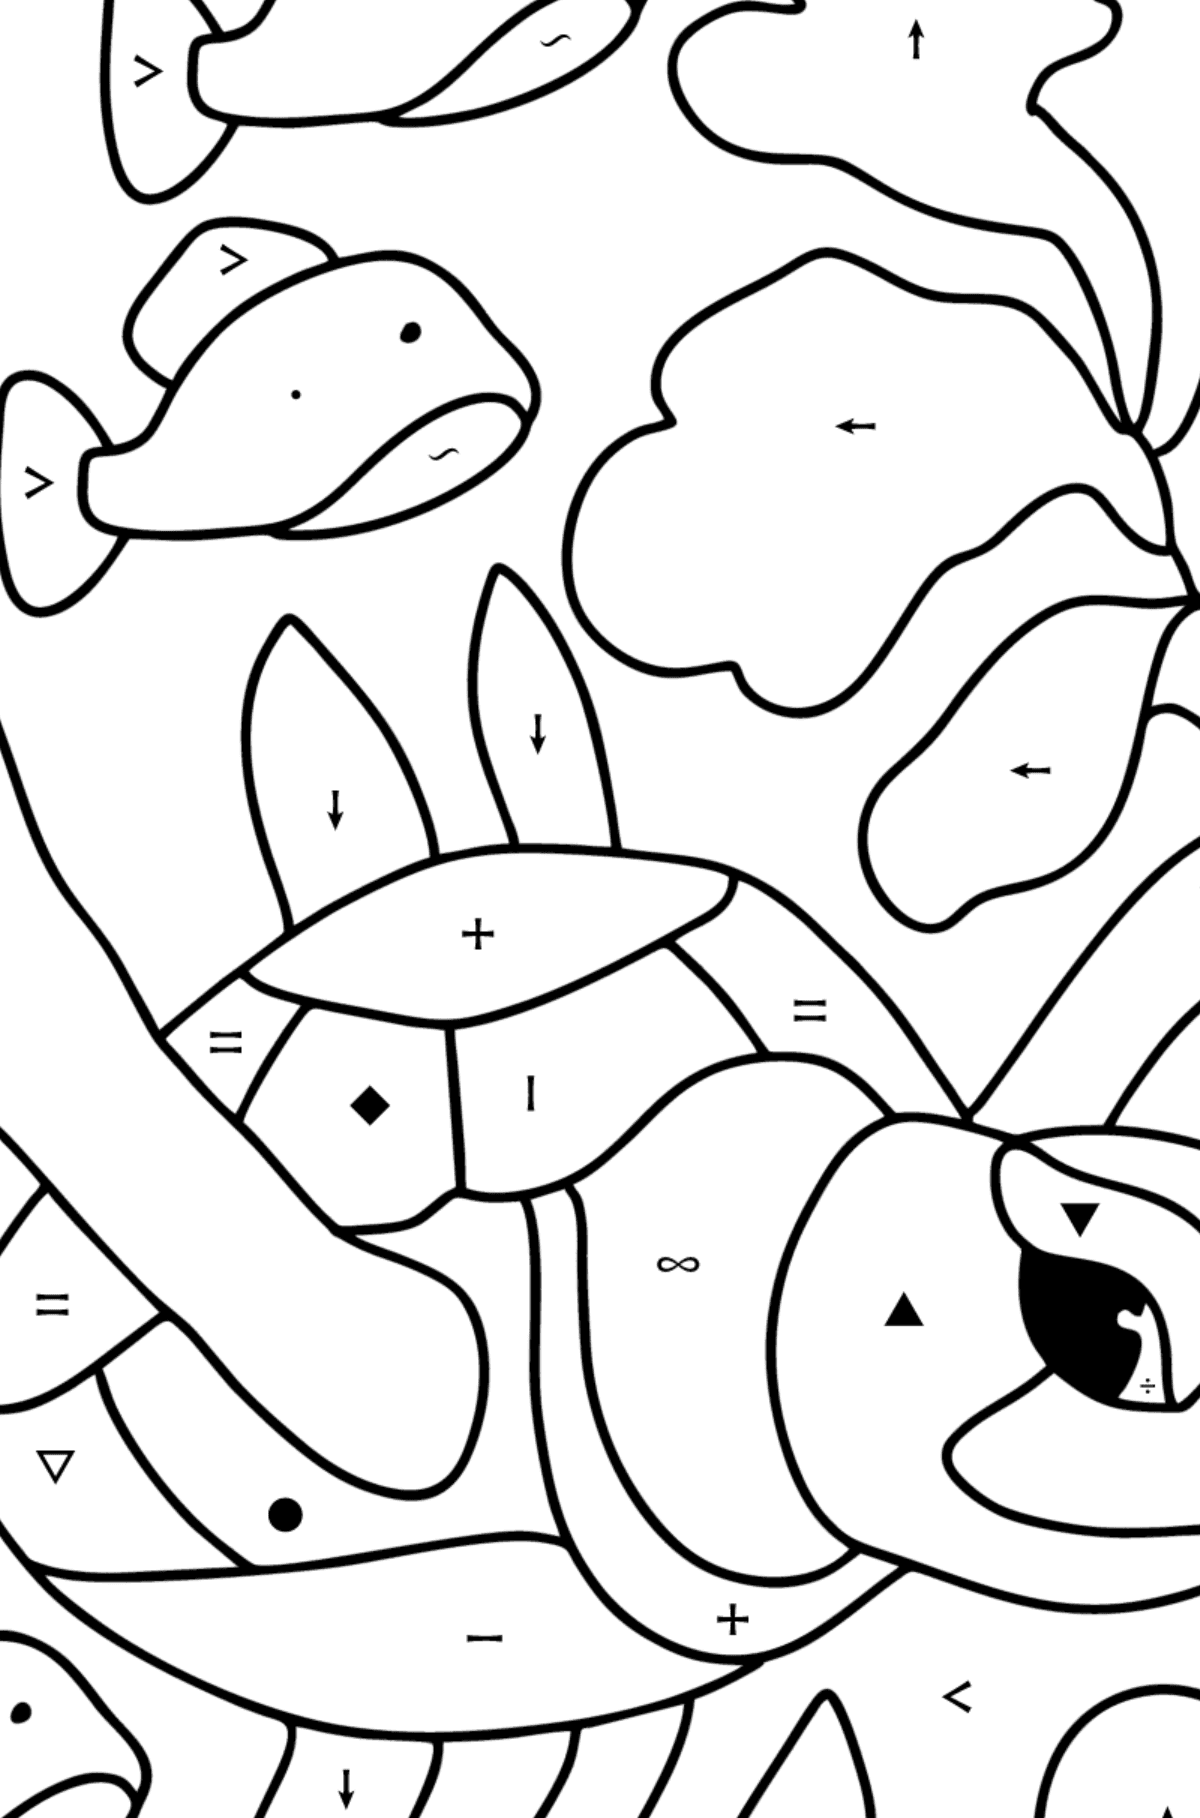 Sea turtle coloring page - Coloring by Symbols for Kids